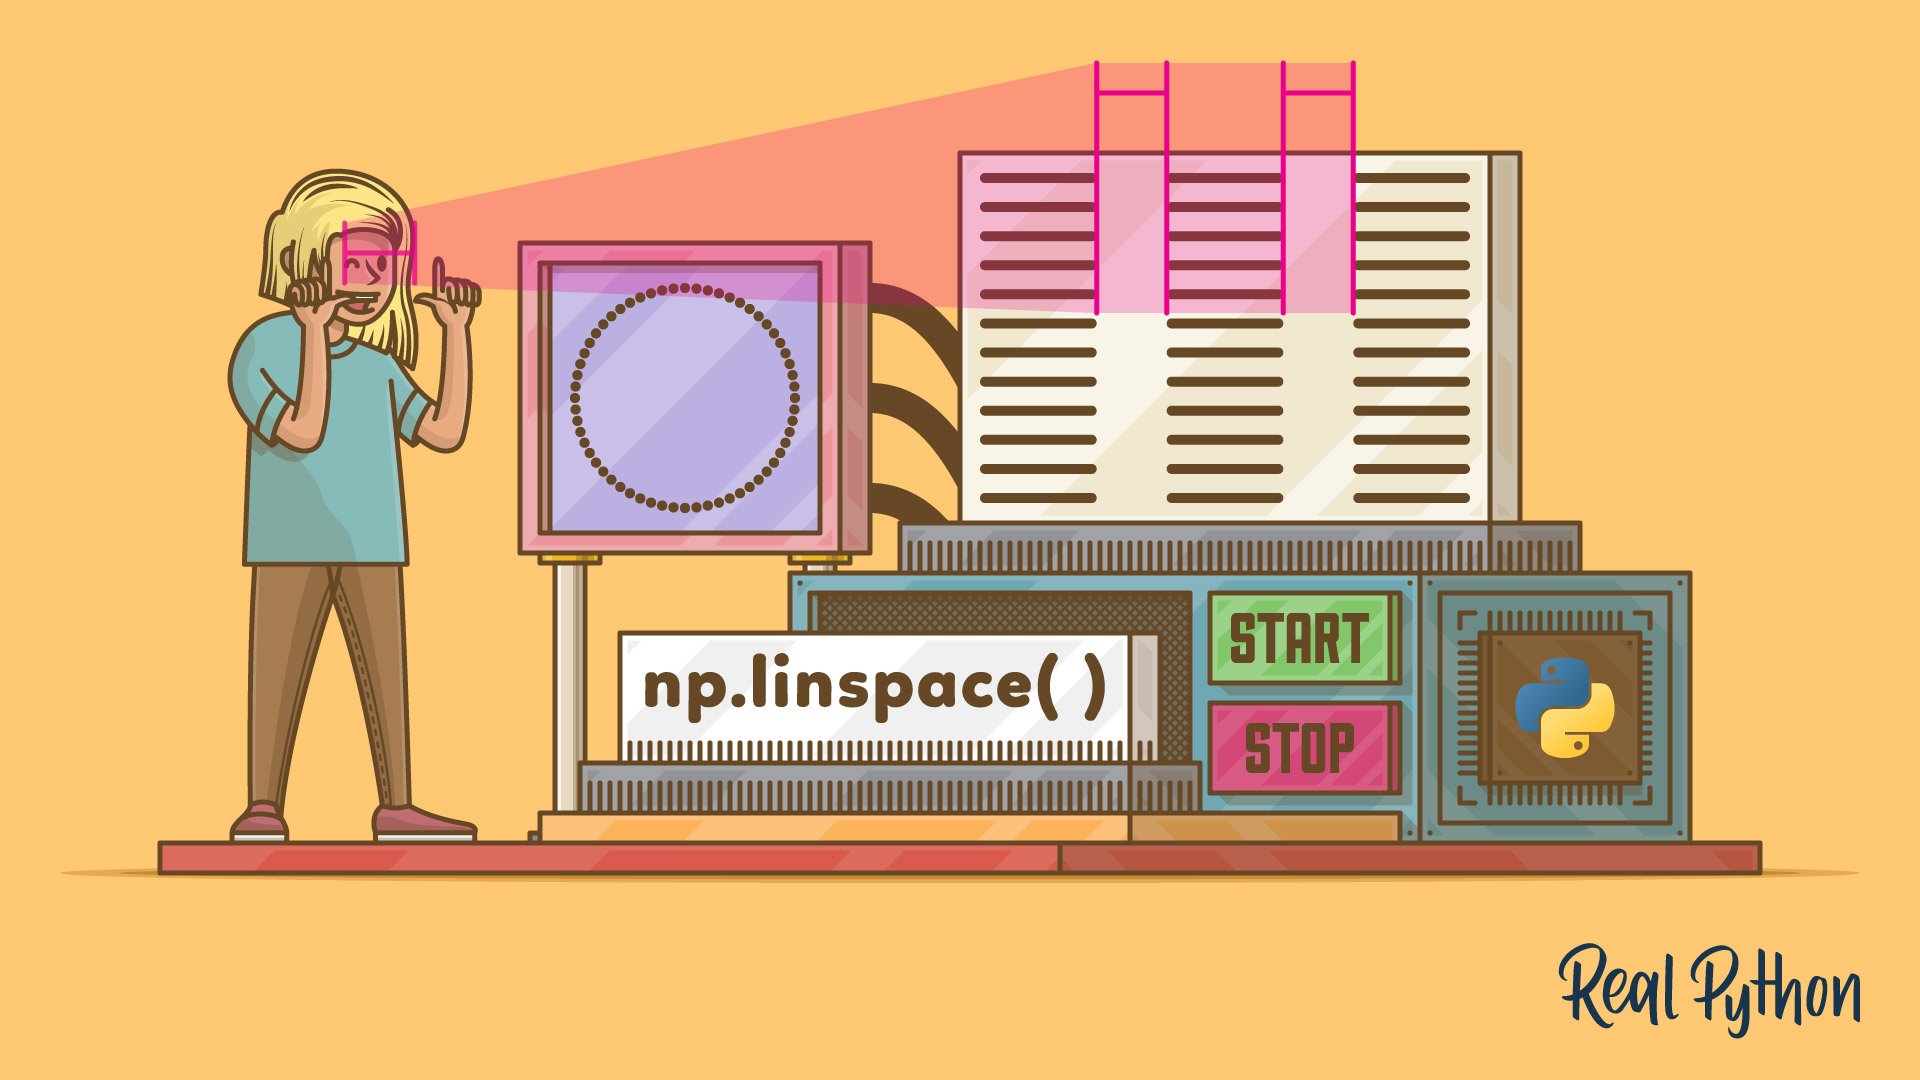 np.linspace(): Create Evenly or Non-Evenly Spaced Arrays